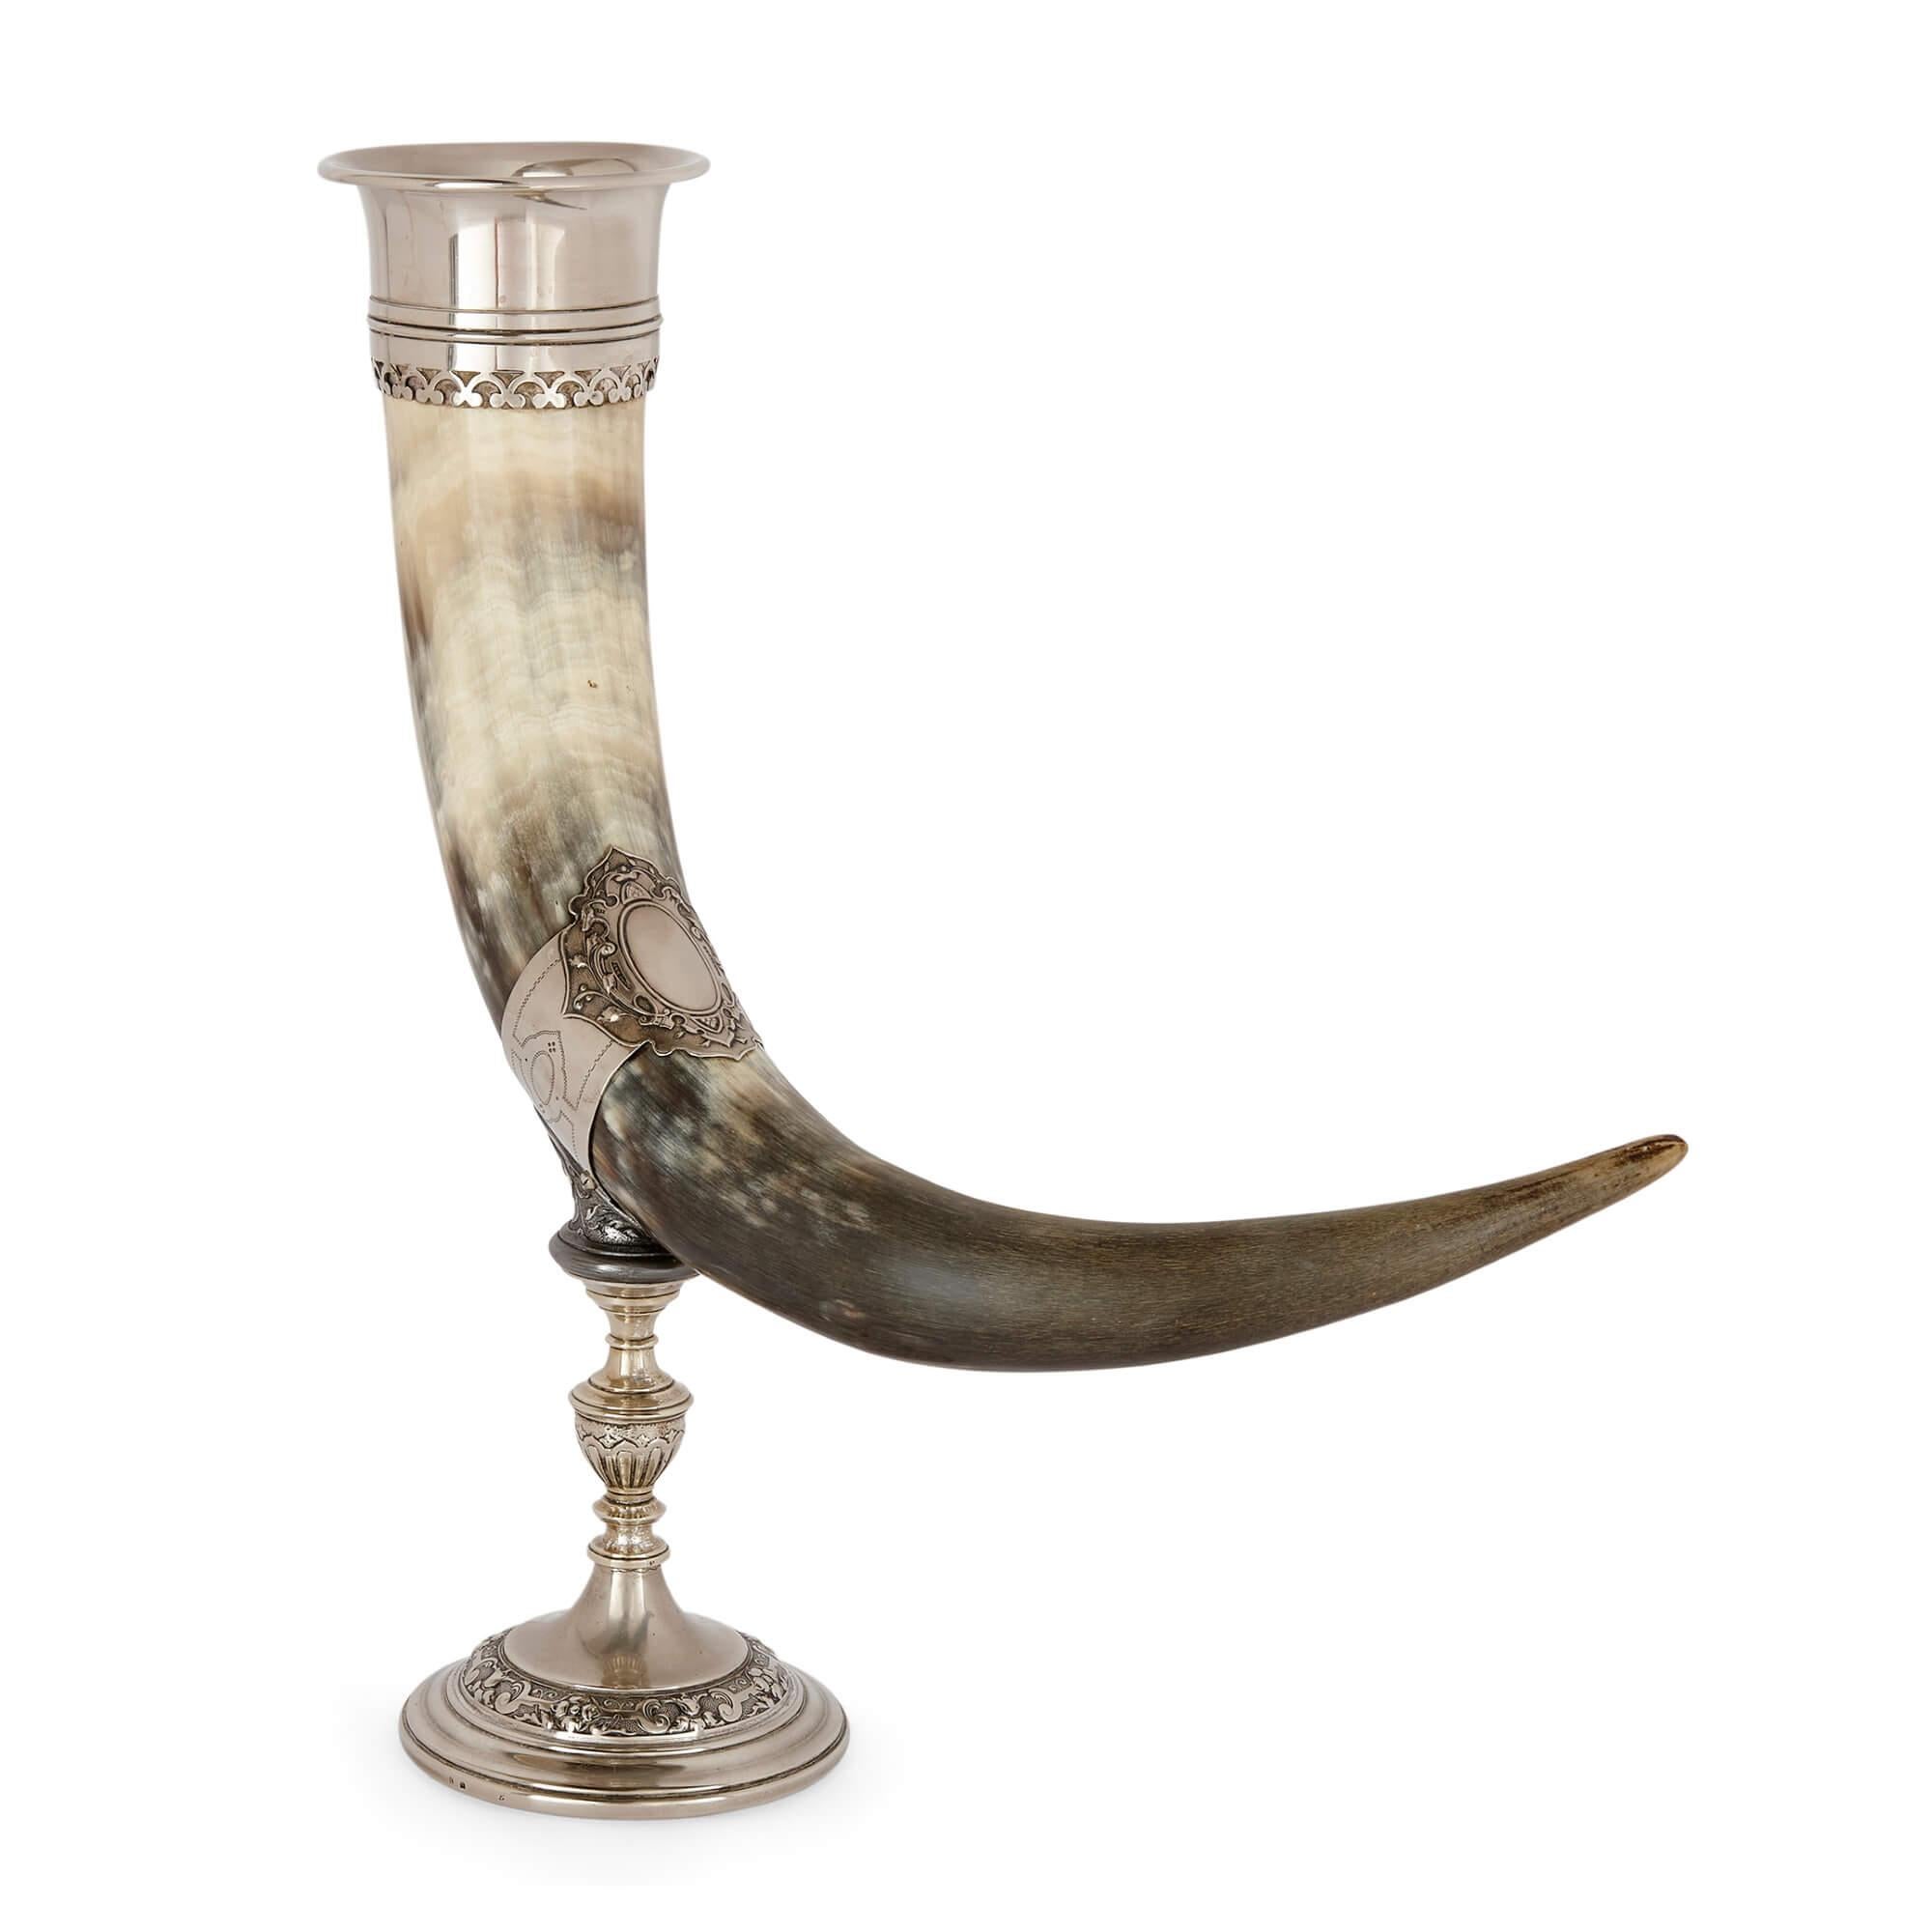 Silver plated horn cornucopia vase by WMF
German, Early 20th Century
Height 37.5cm, width 33cm, depth 11cm

Made from horn and mounted with silver plate, this superb piece is an antique cornucopia vase crafted in Germany around the turn of the